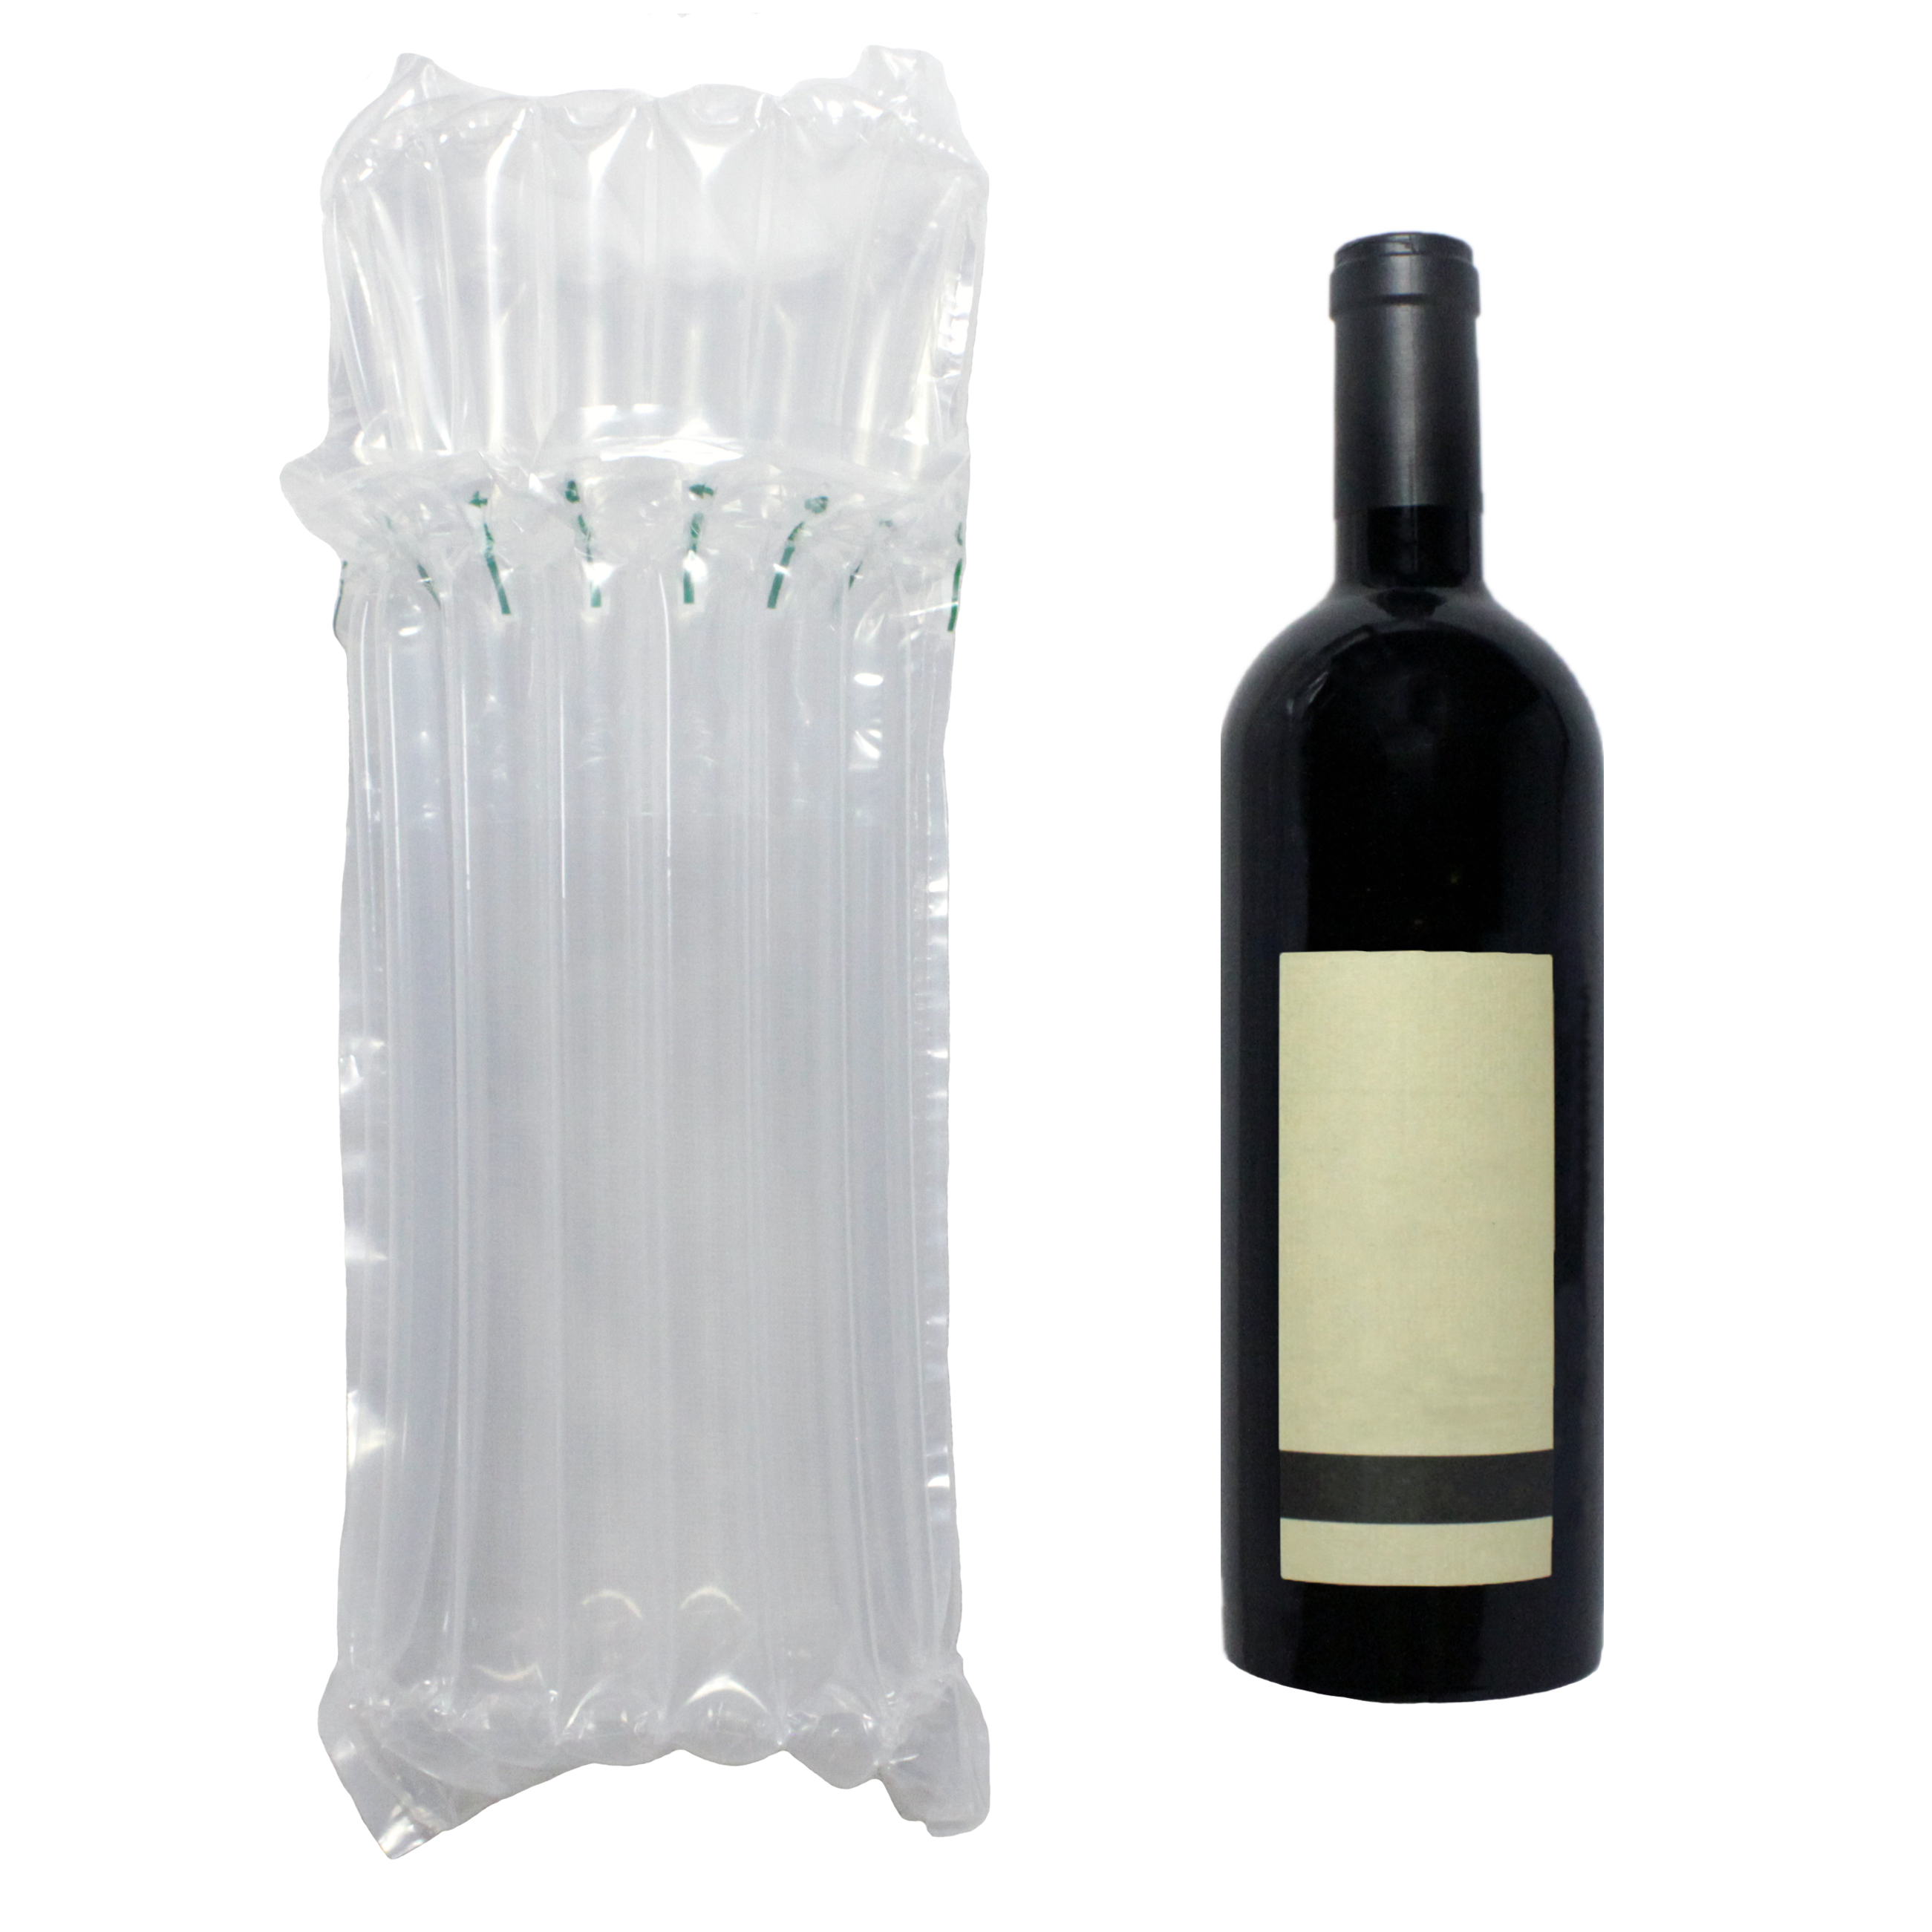 Wine Bottle Protector Bags 15 Pack - Inflatable Air Column Cushioning Sleeves Packaging Ensures Safe Transportation of Glass Bottles during Travel or Shipping with Free Pump - image 5 of 7